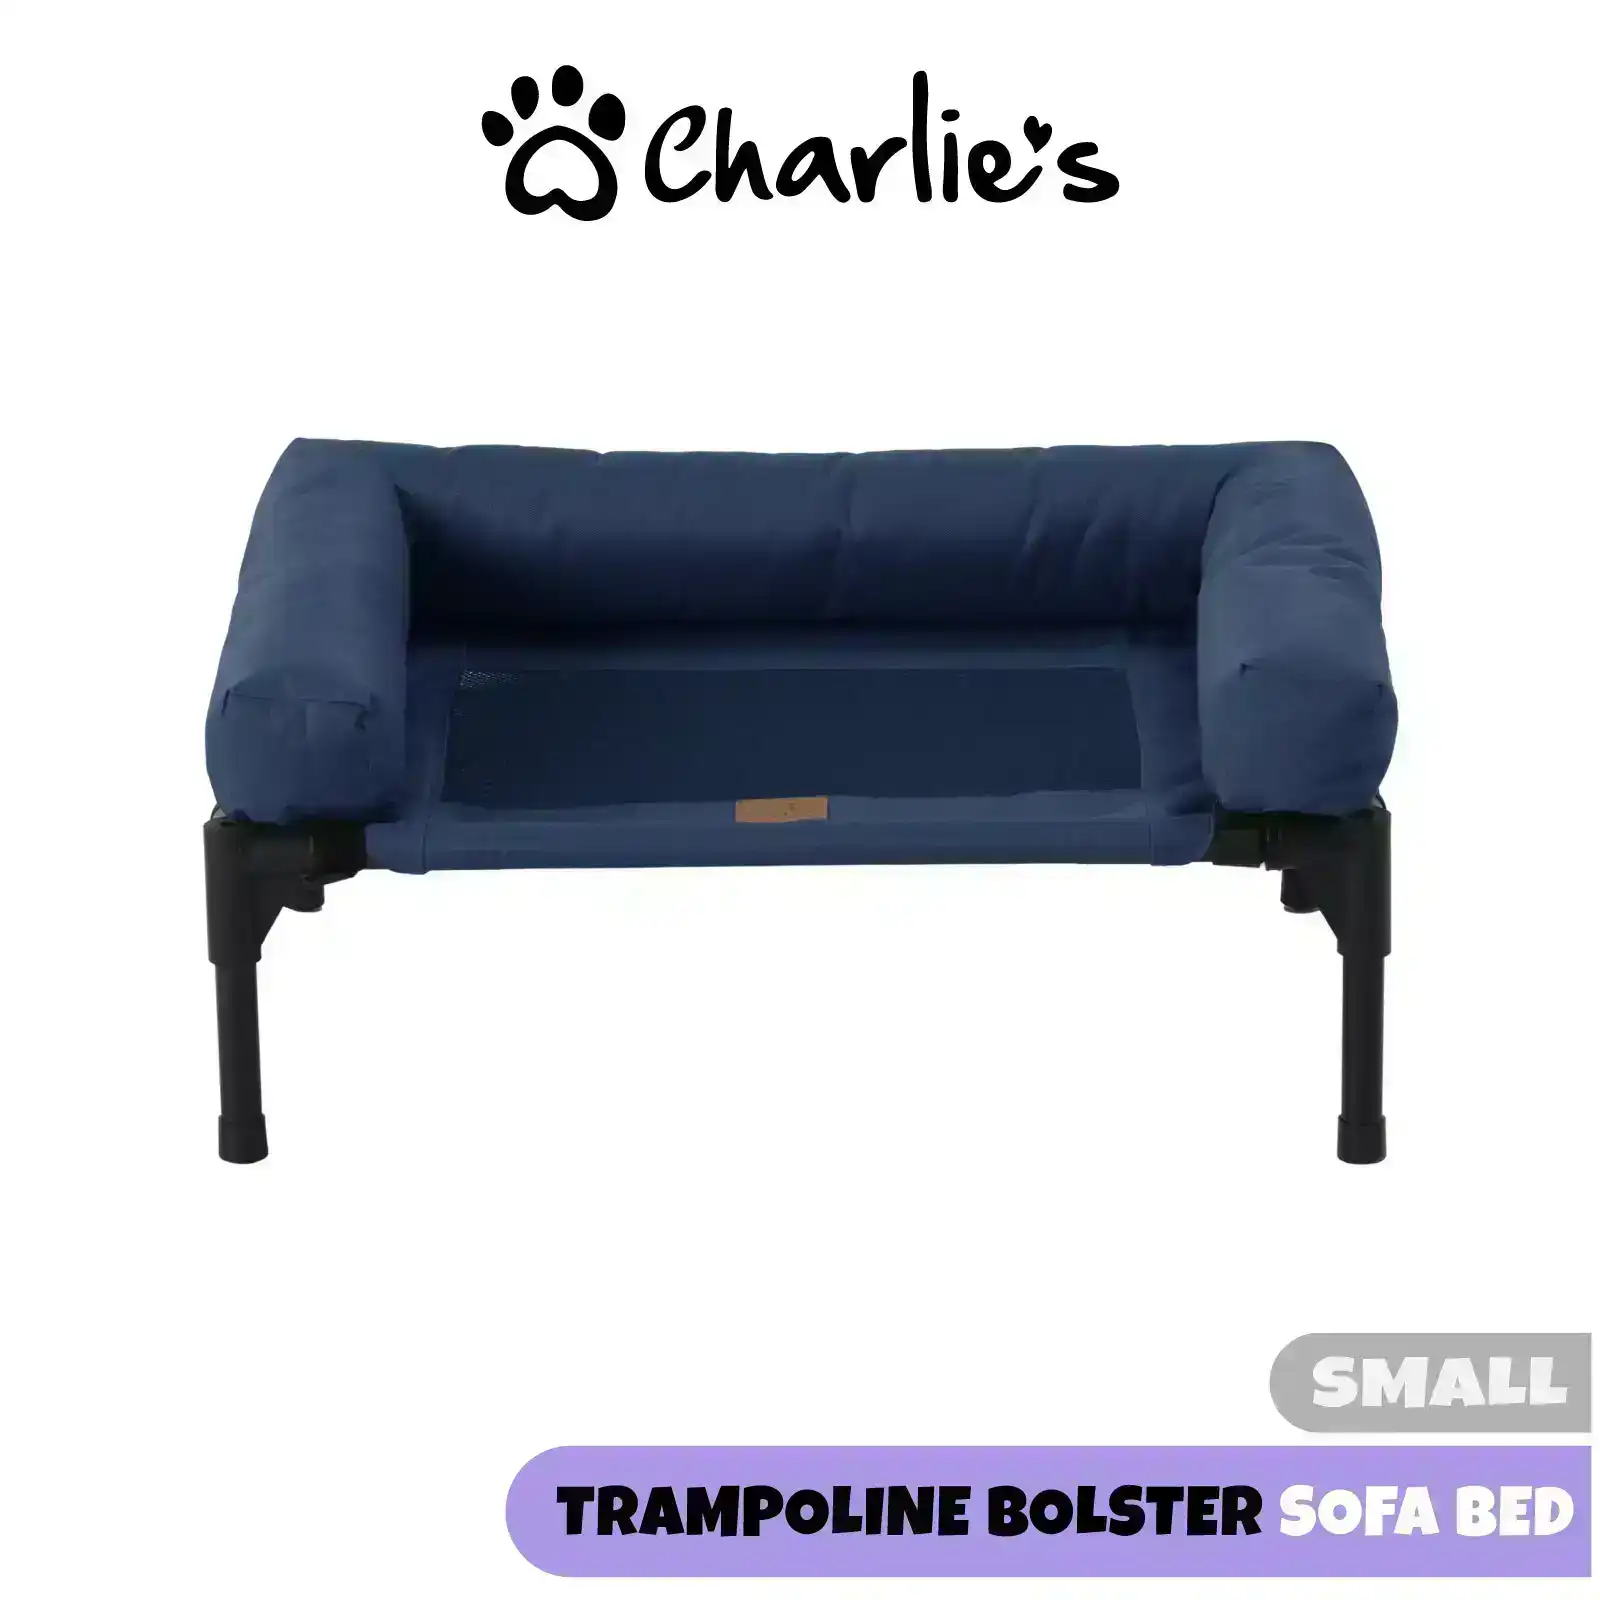 Charlie's Elevated Trampoline Bolster Sofa Dog Bed Blue Small